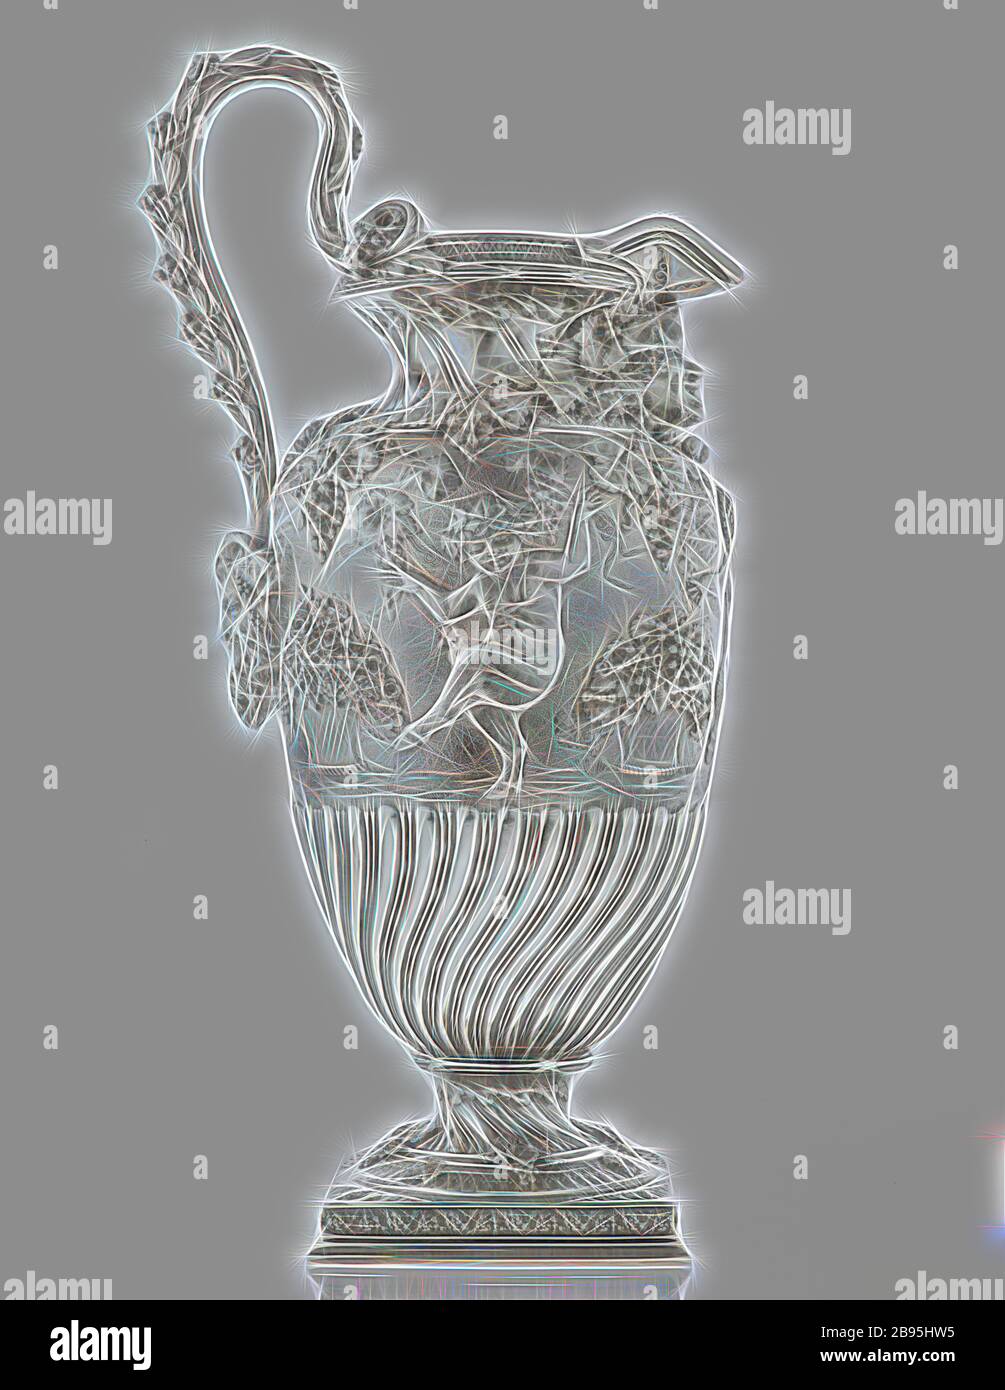 wine ewer, Tiffany & Co., Manufacturer (American), about 1890, silver, 18-1/2 x 7-1/4 x 9-3/4 in., Inscribed, at underside: Thomas Horncastle Esquire Presented by the Mutual Life Insurance Company of New York Jan 1 1890 Inscribed, at underside in center: Tiffany & Co. 5659 Makers 7117/ STERLING SILVER/ 925-1000/ M, 5Q'TS Inscribed, scratched at underside: 116/85 589, 461698, Decorative Arts, Reimagined by Gibon, design of warm cheerful glowing of brightness and light rays radiance. Classic art reinvented with a modern twist. Photography inspired by futurism, embracing dynamic energy of modern Stock Photo